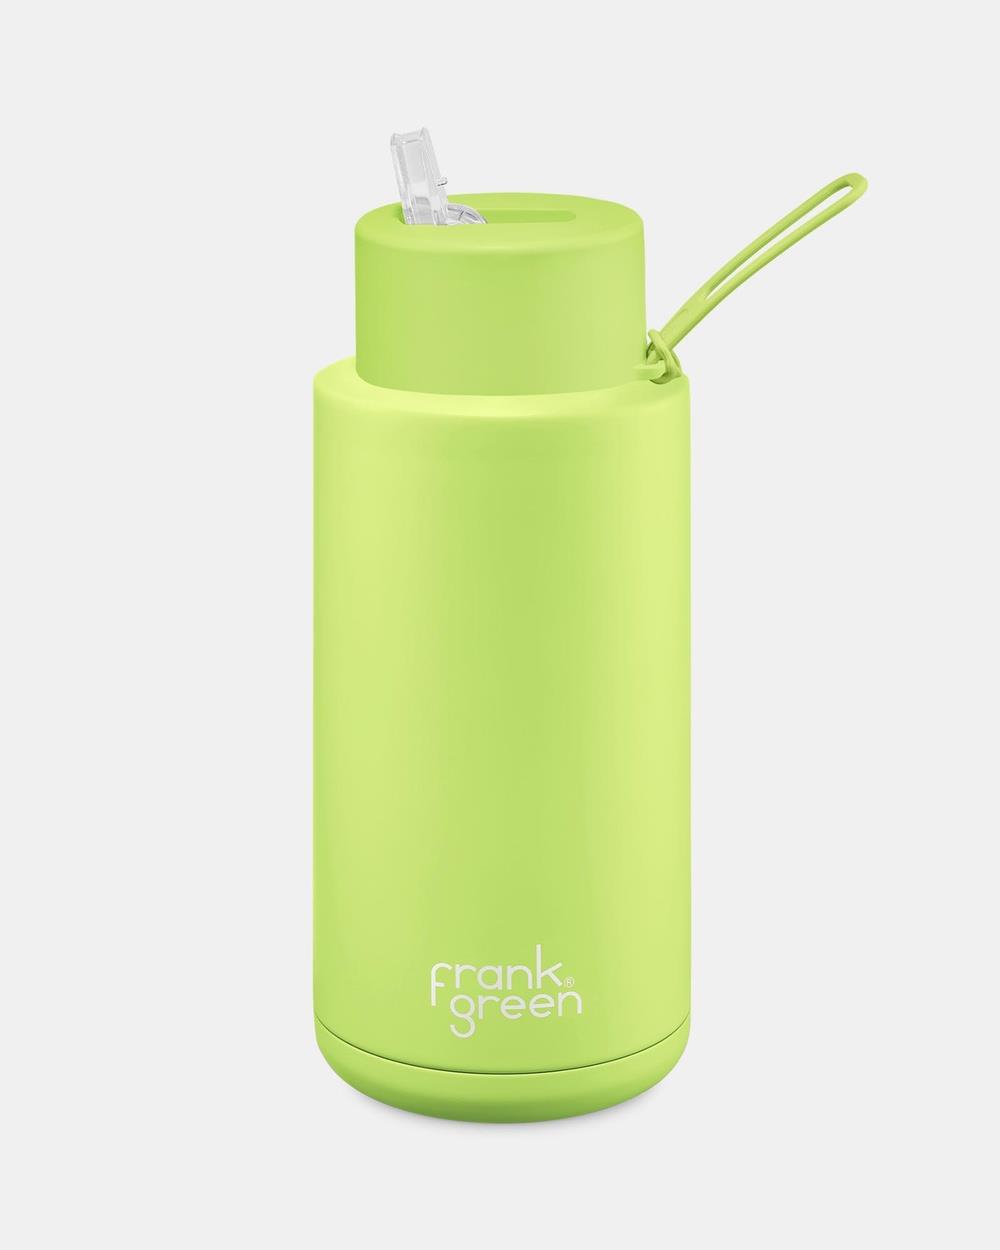 Frank Green - 34oz Stainless Steel Ceramic Reusable Bottle with Straw Lid - Home (Pistachio Green) 34oz Stainless Steel Ceramic Reusable Bottle with Straw Lid